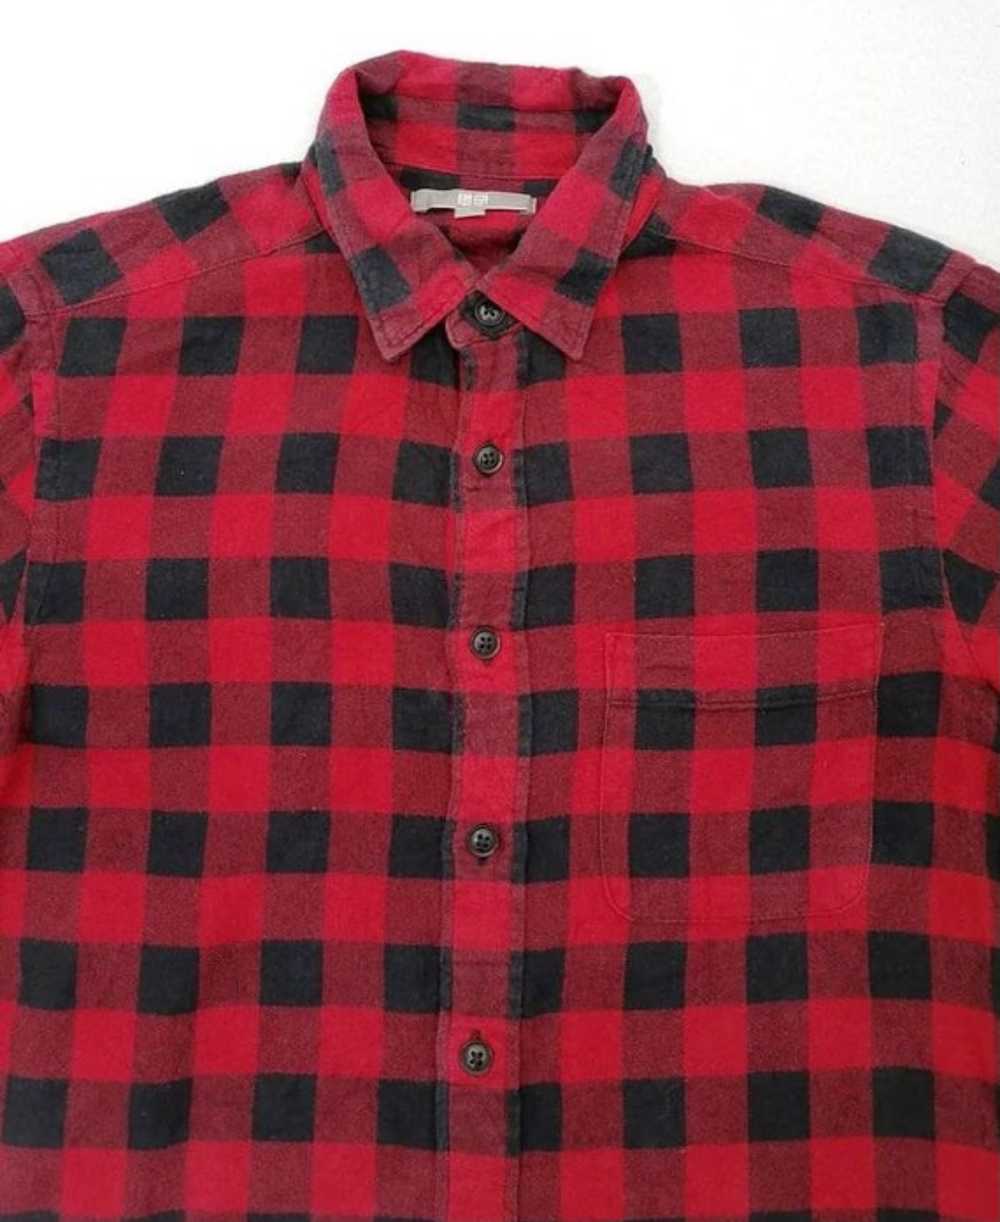 Uniqlo Flannel Longsleeve Buttons Shirt - image 3